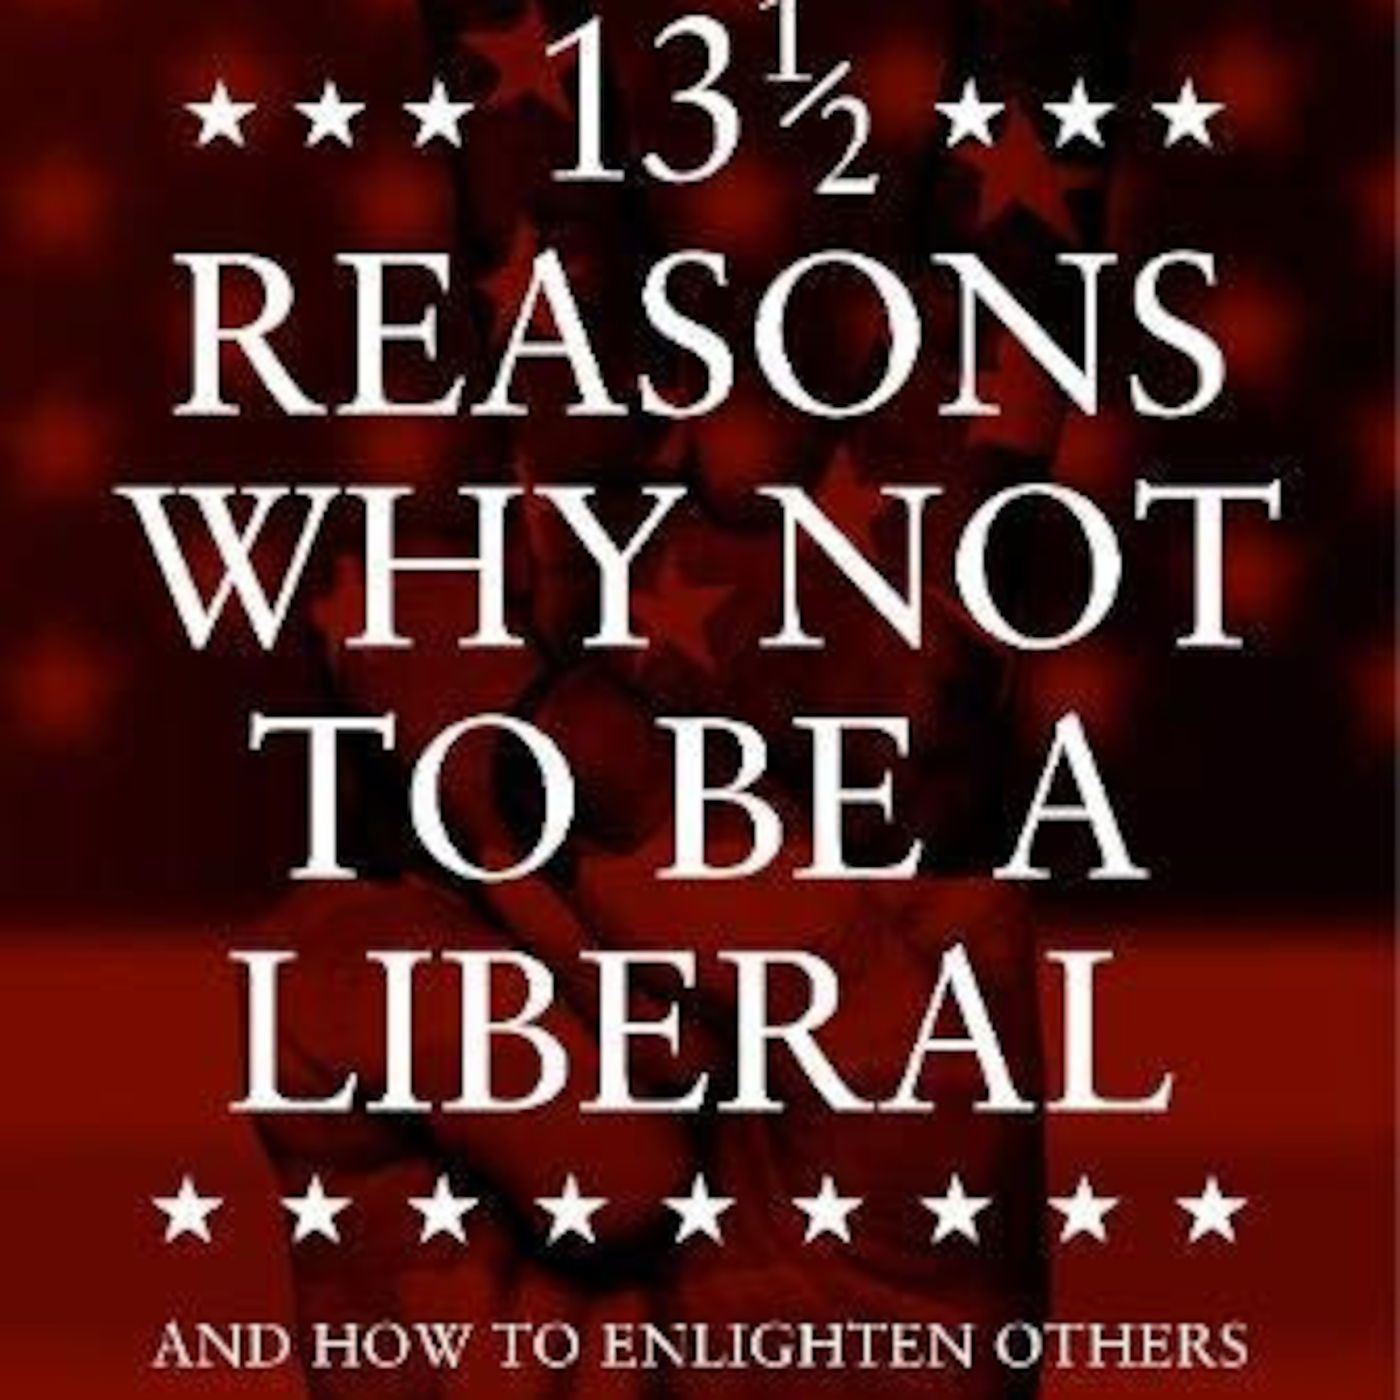 Episode 854: 13 1/2 Reasons Why NOT To Be A Liberal: And How to Enlighten Others